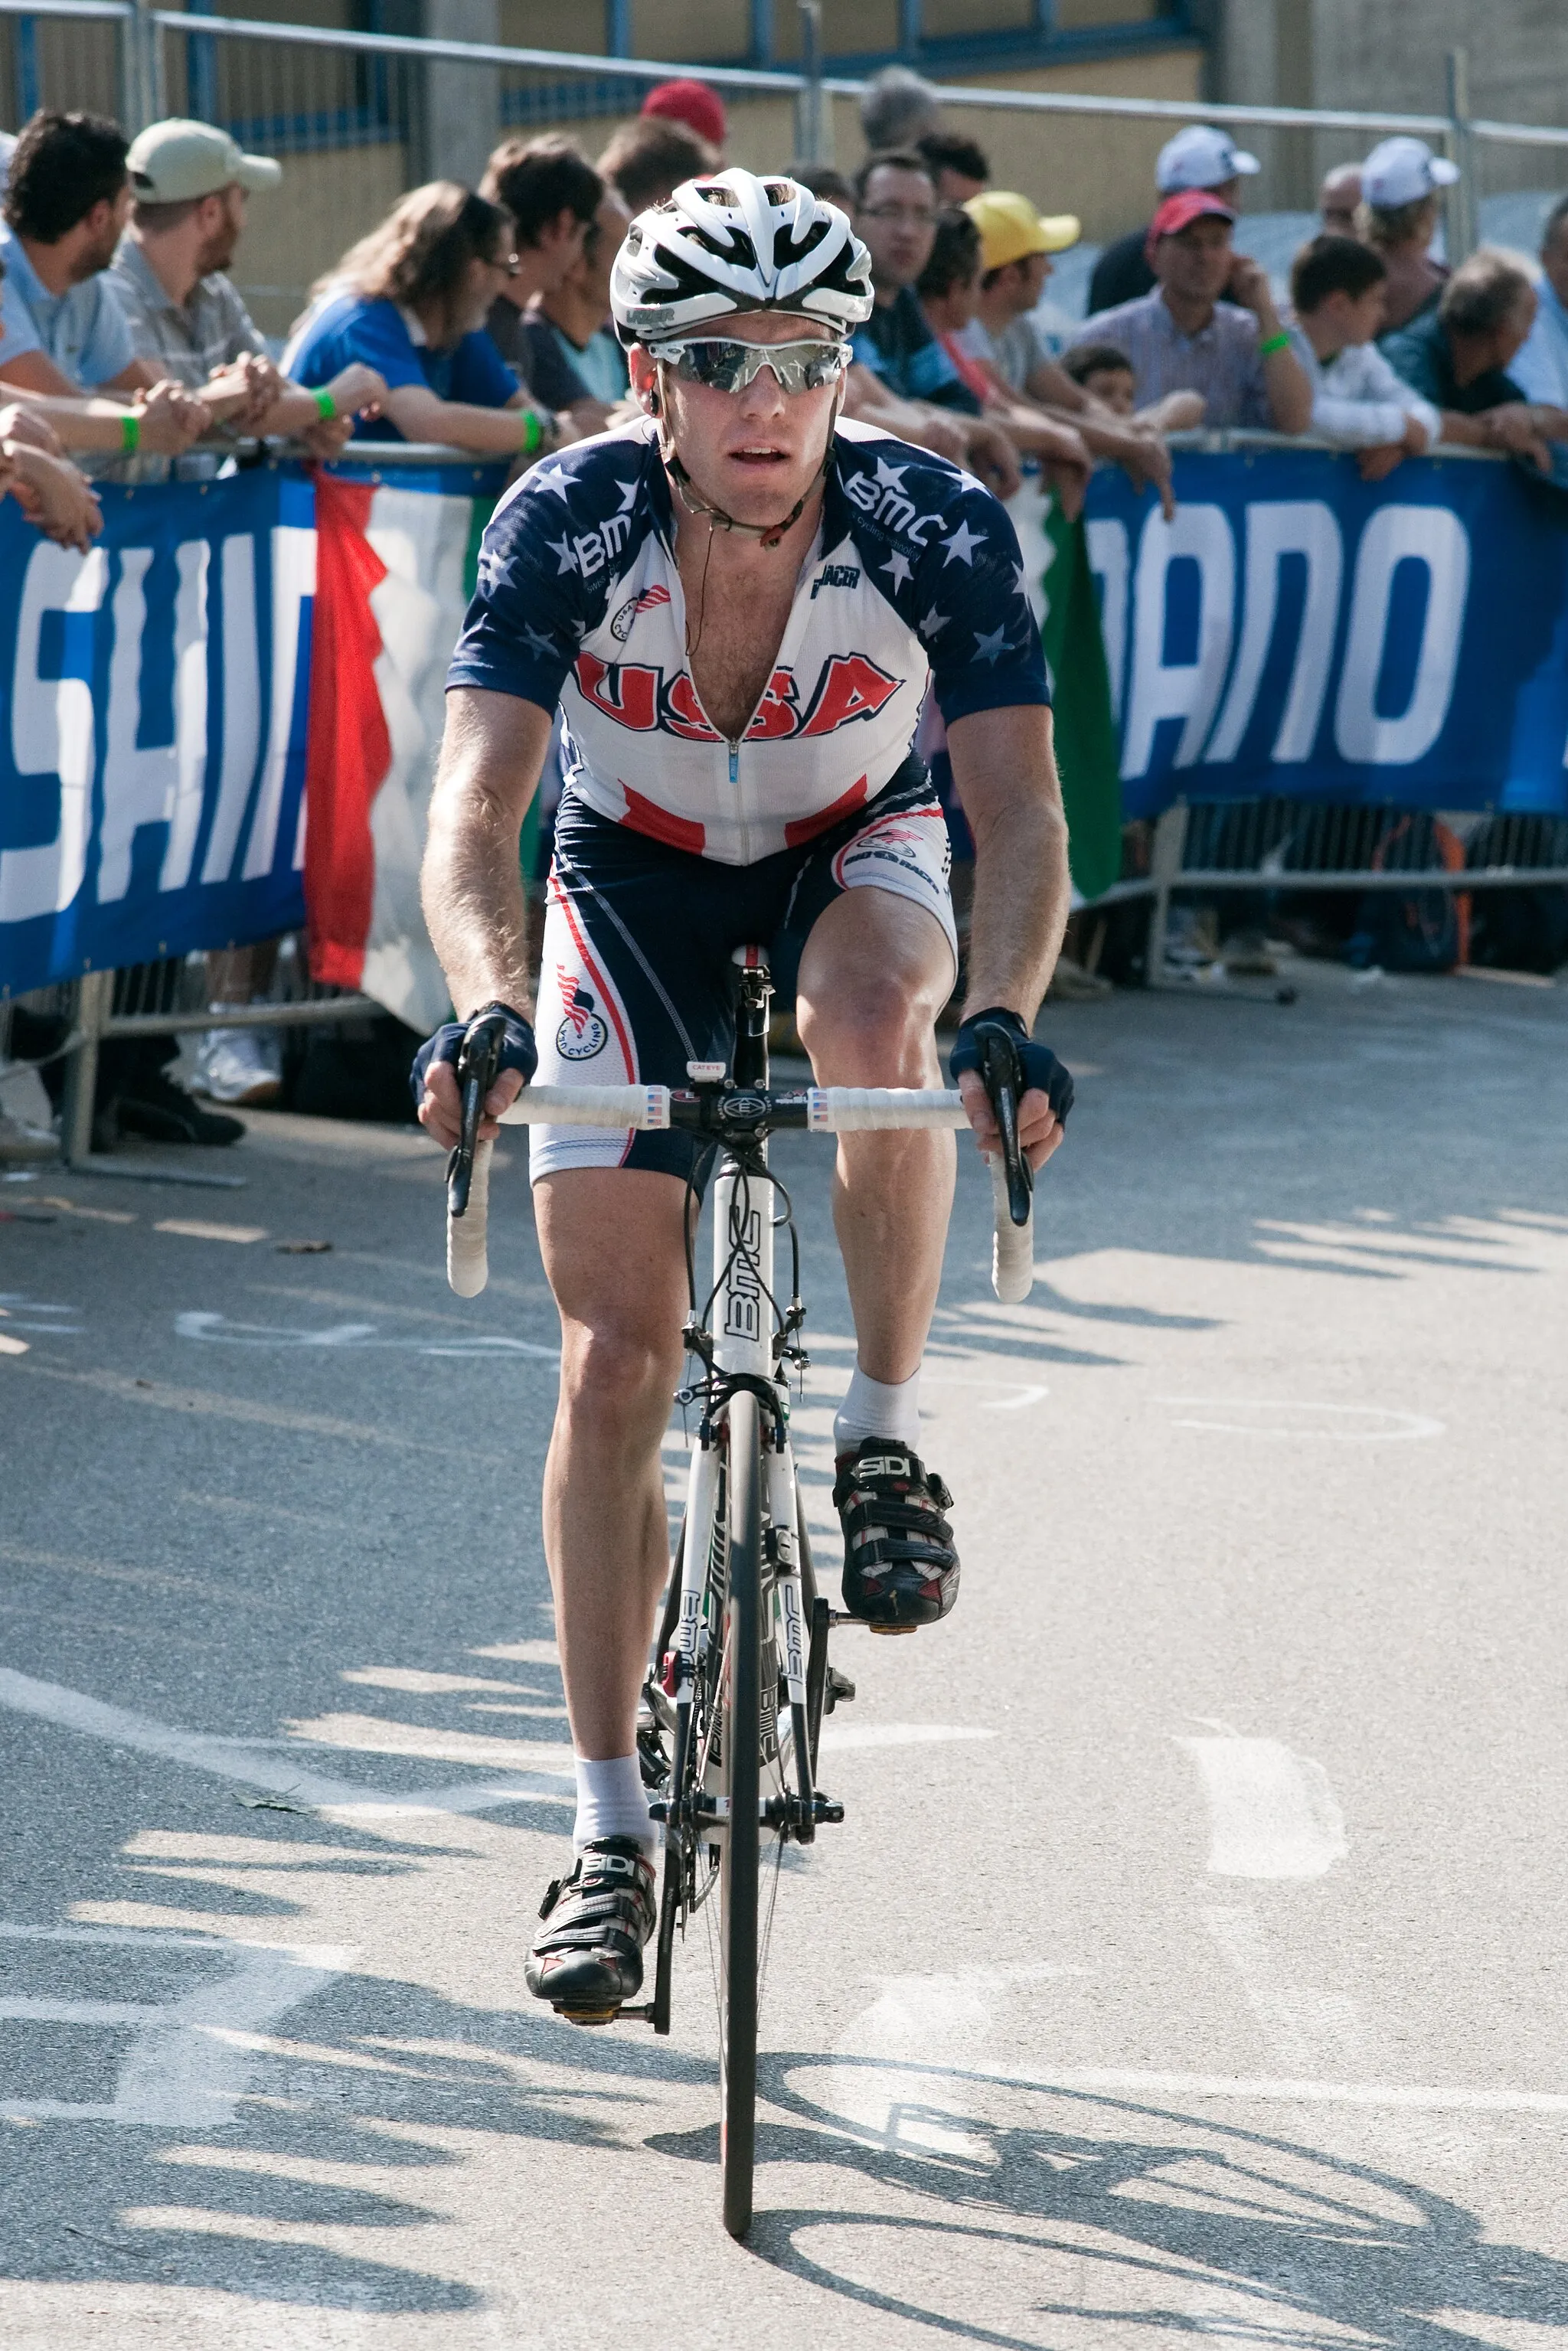 Photo showing: Brent Bookwalter during the 2009 UCI Road World Championships in Mendrisio, Switzerland